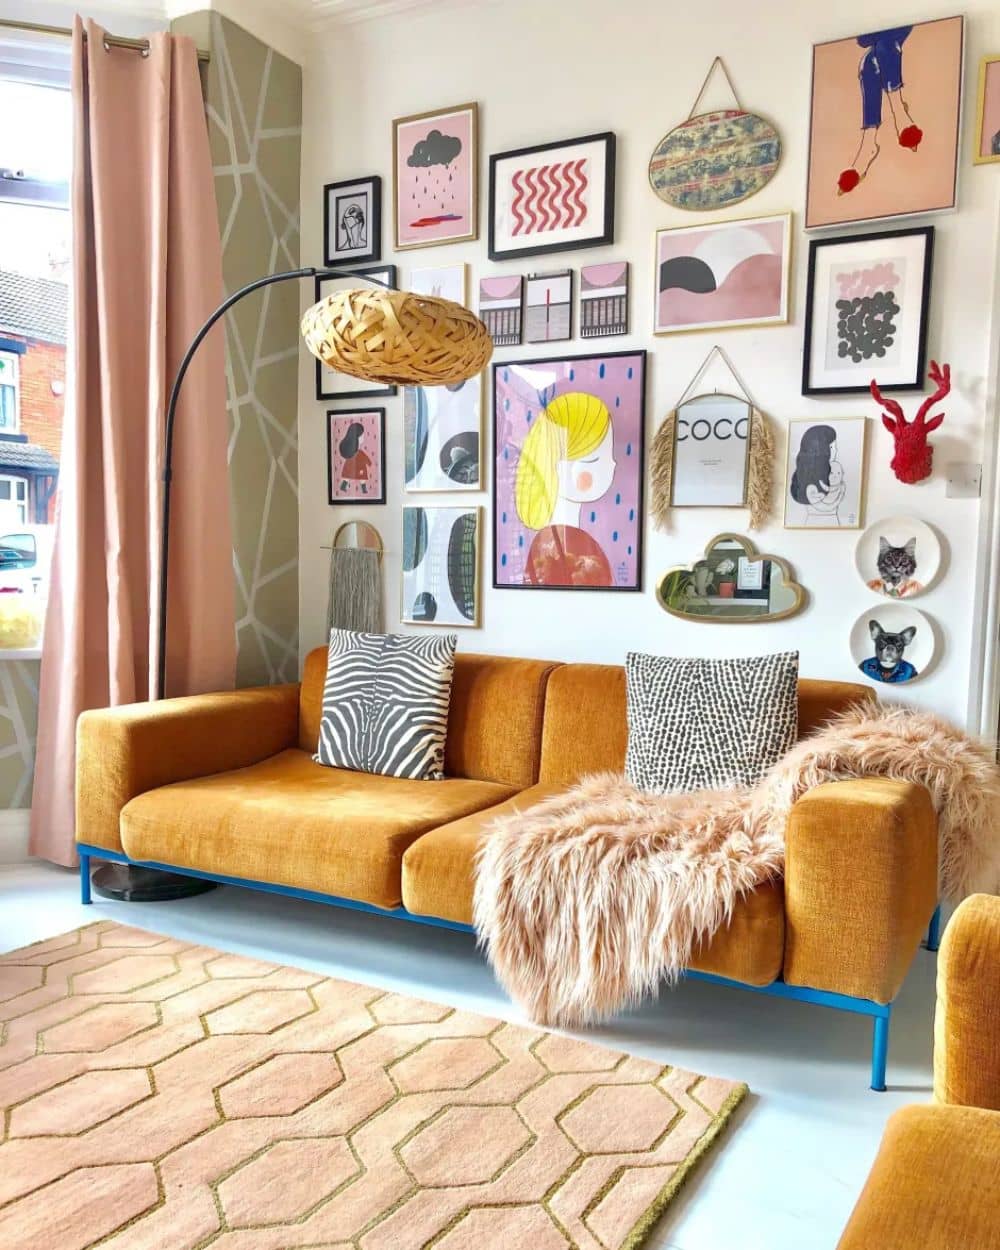 Eclectic gallery wall idea in living room with an orange sofa